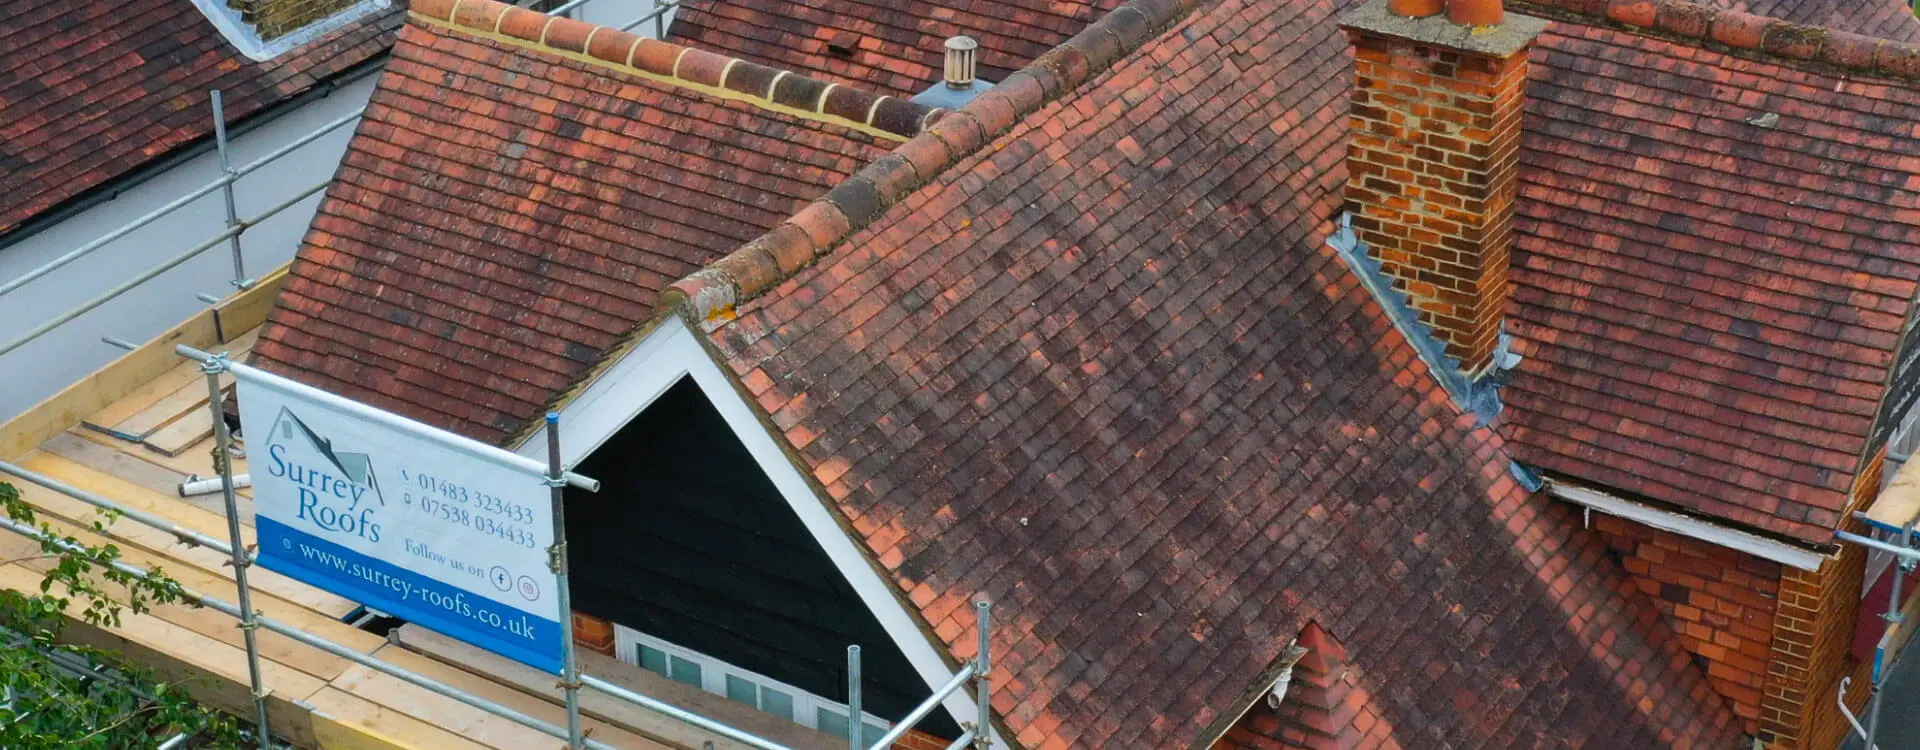 SURREY ROOFS<br/>ROOFING SPECIALISTS